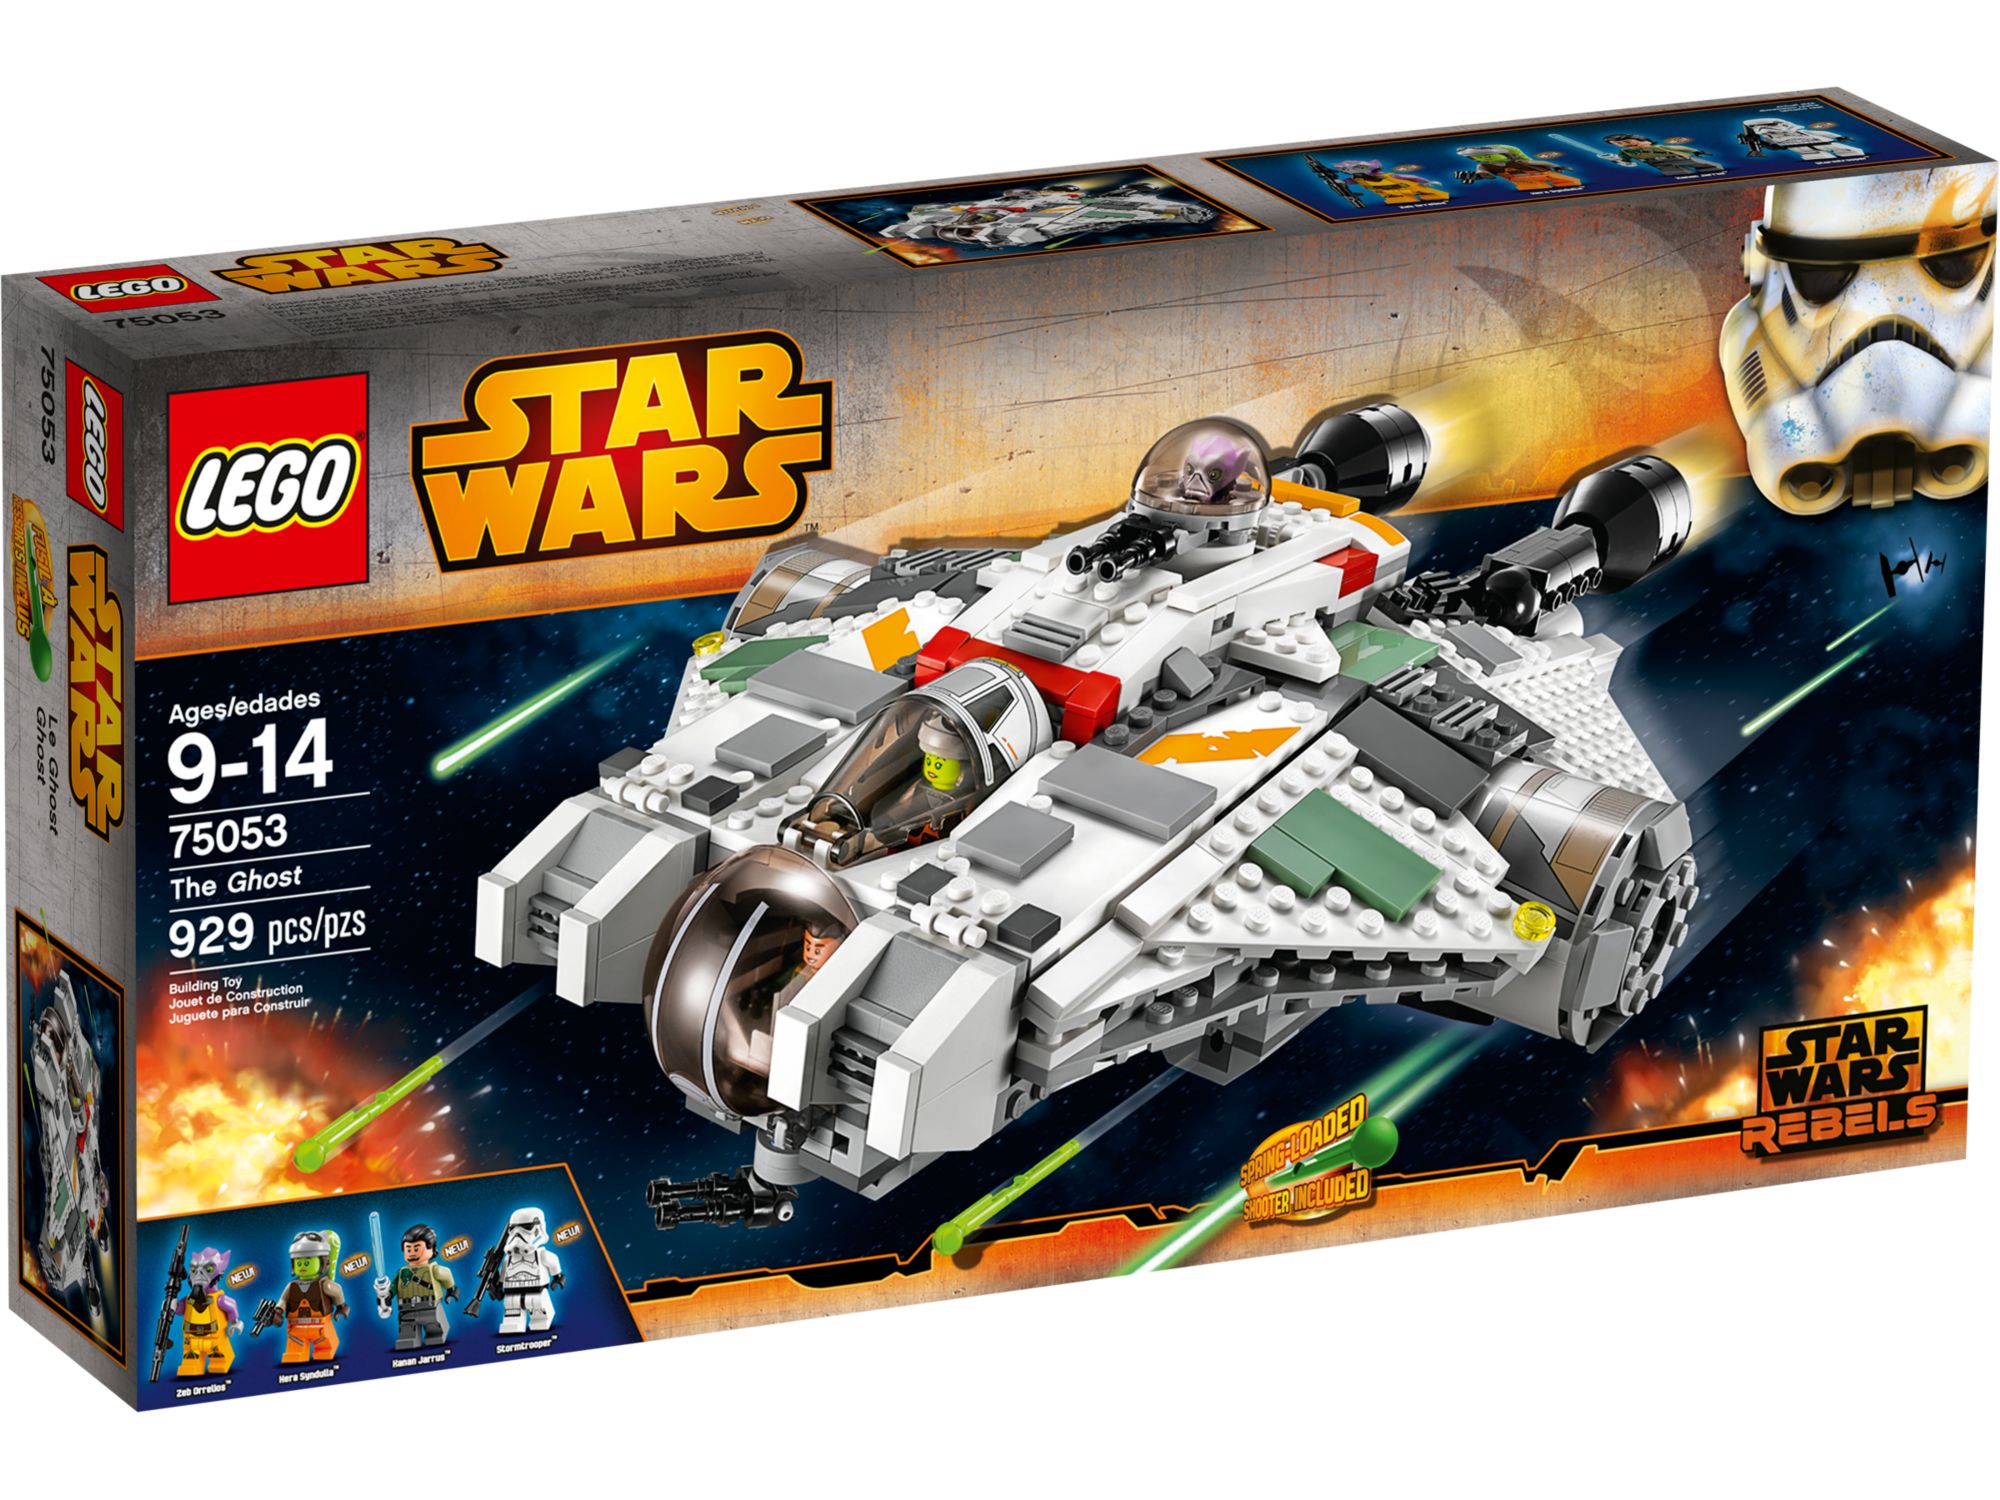 Are You a Star Wars Rebel Looking for a Challenging Lego Build: Construct the Legendary Ghost Ship from Rebels